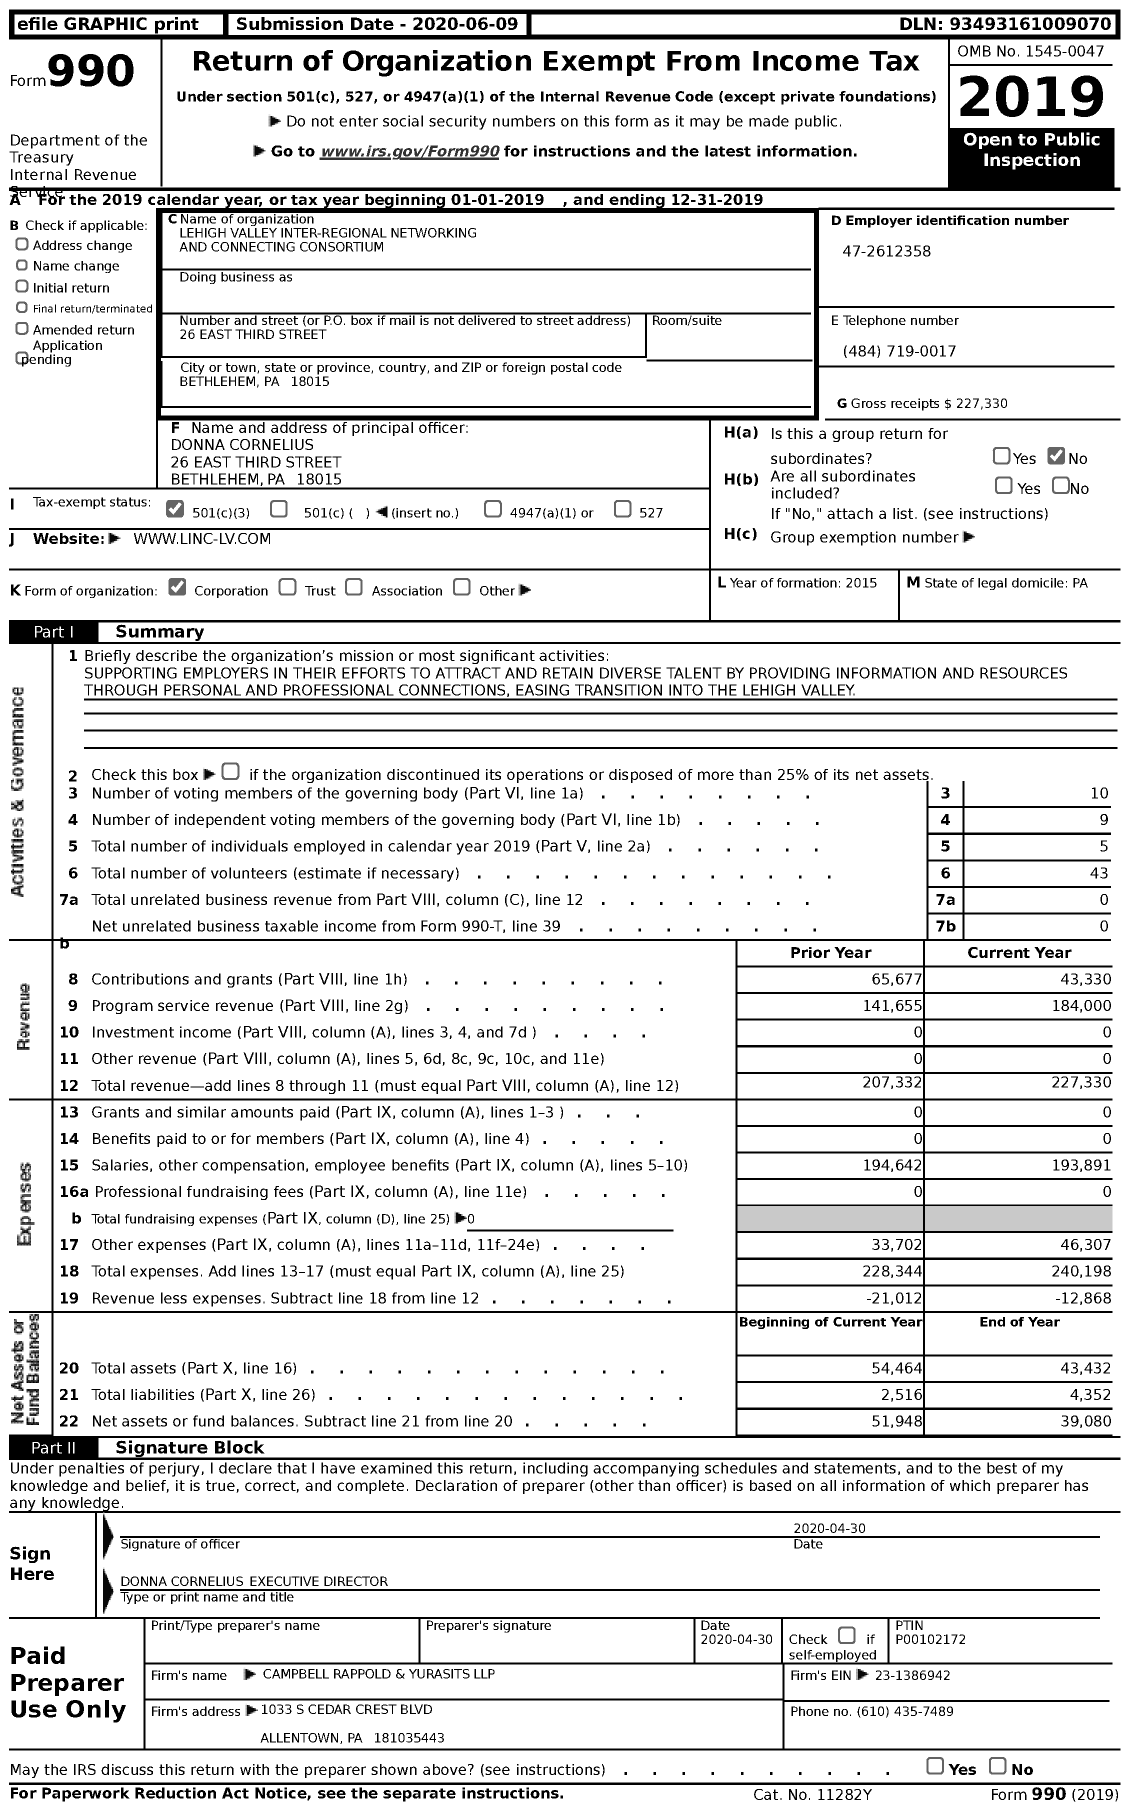 Image of first page of 2019 Form 990 for Lehigh Valley Inter-Regional Networking and Connecting Consortium